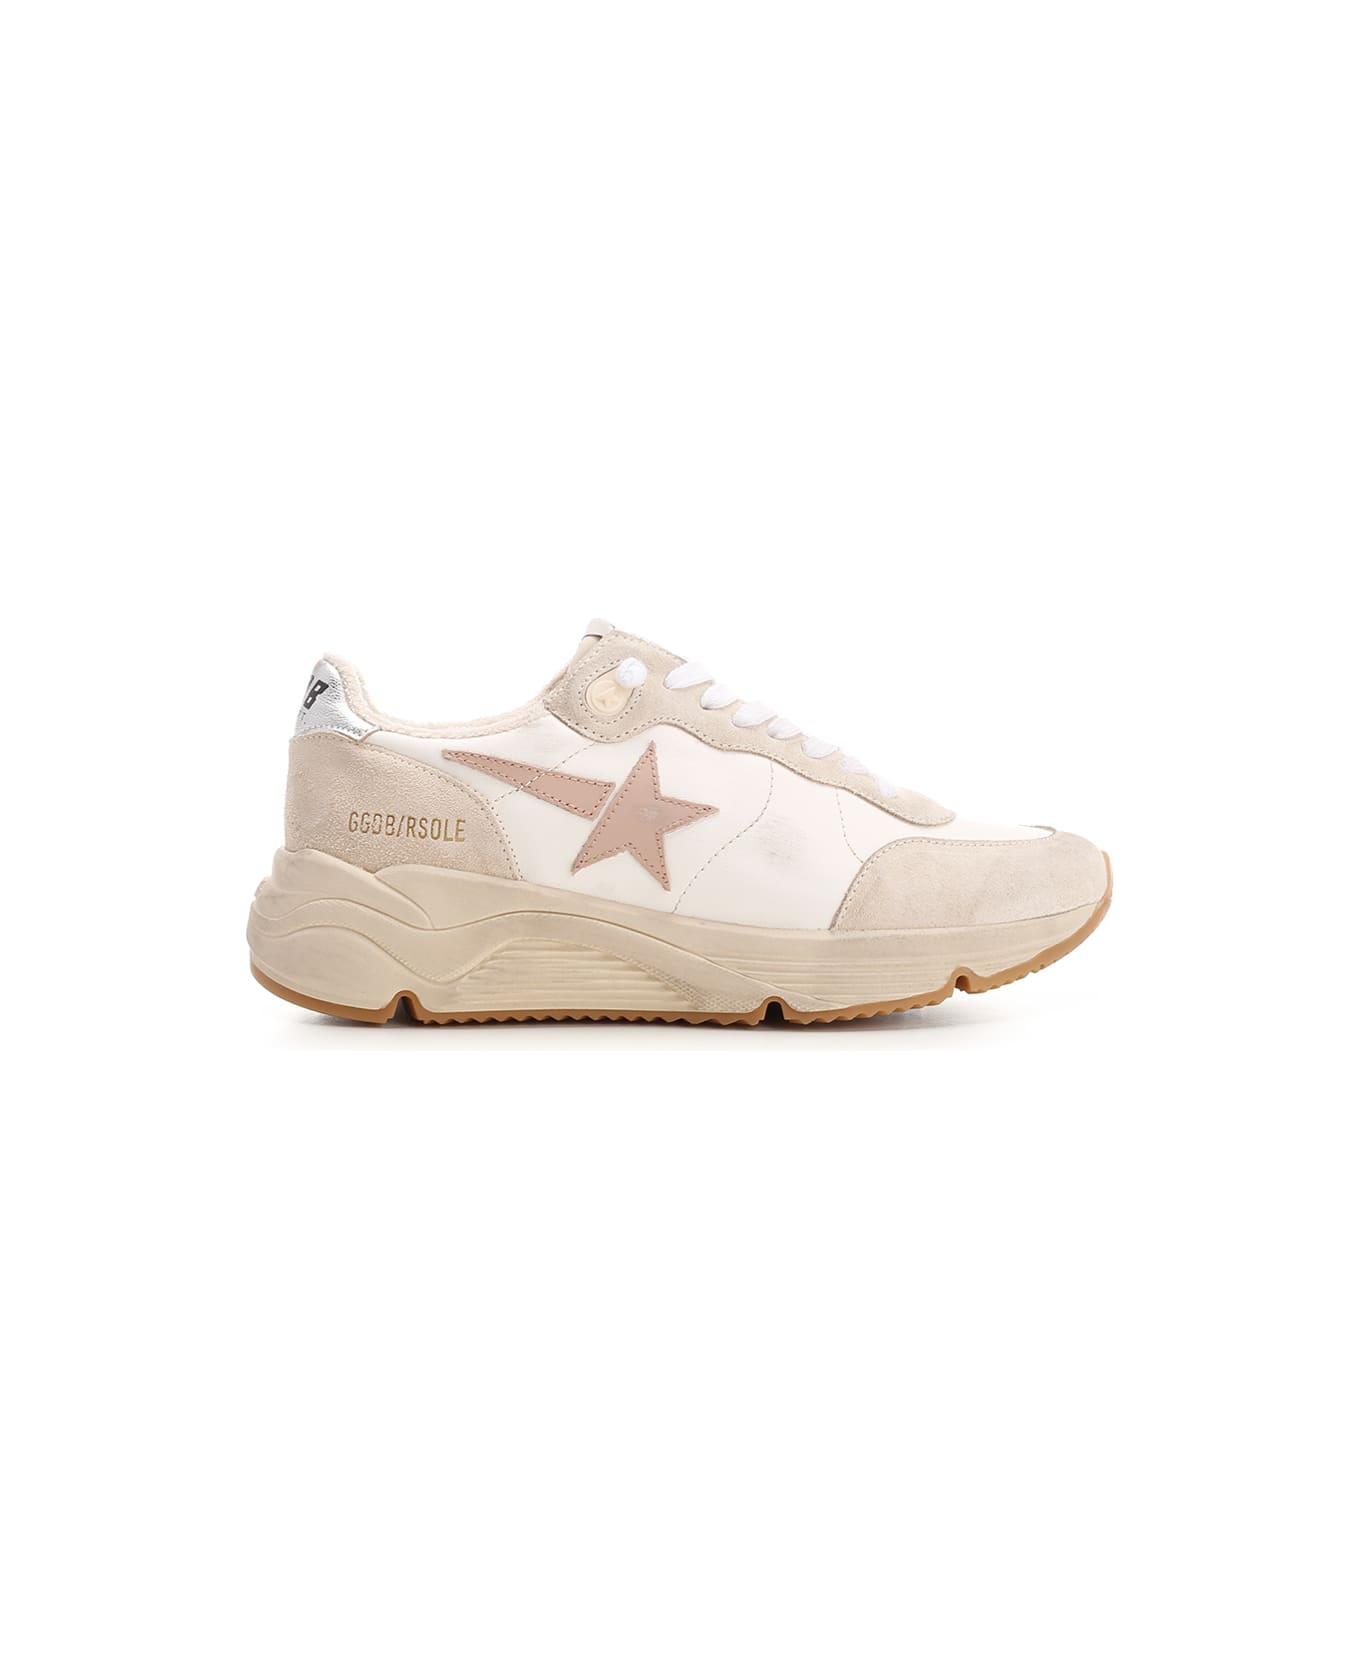 Golden Goose 'running Sole' Sneakers - White